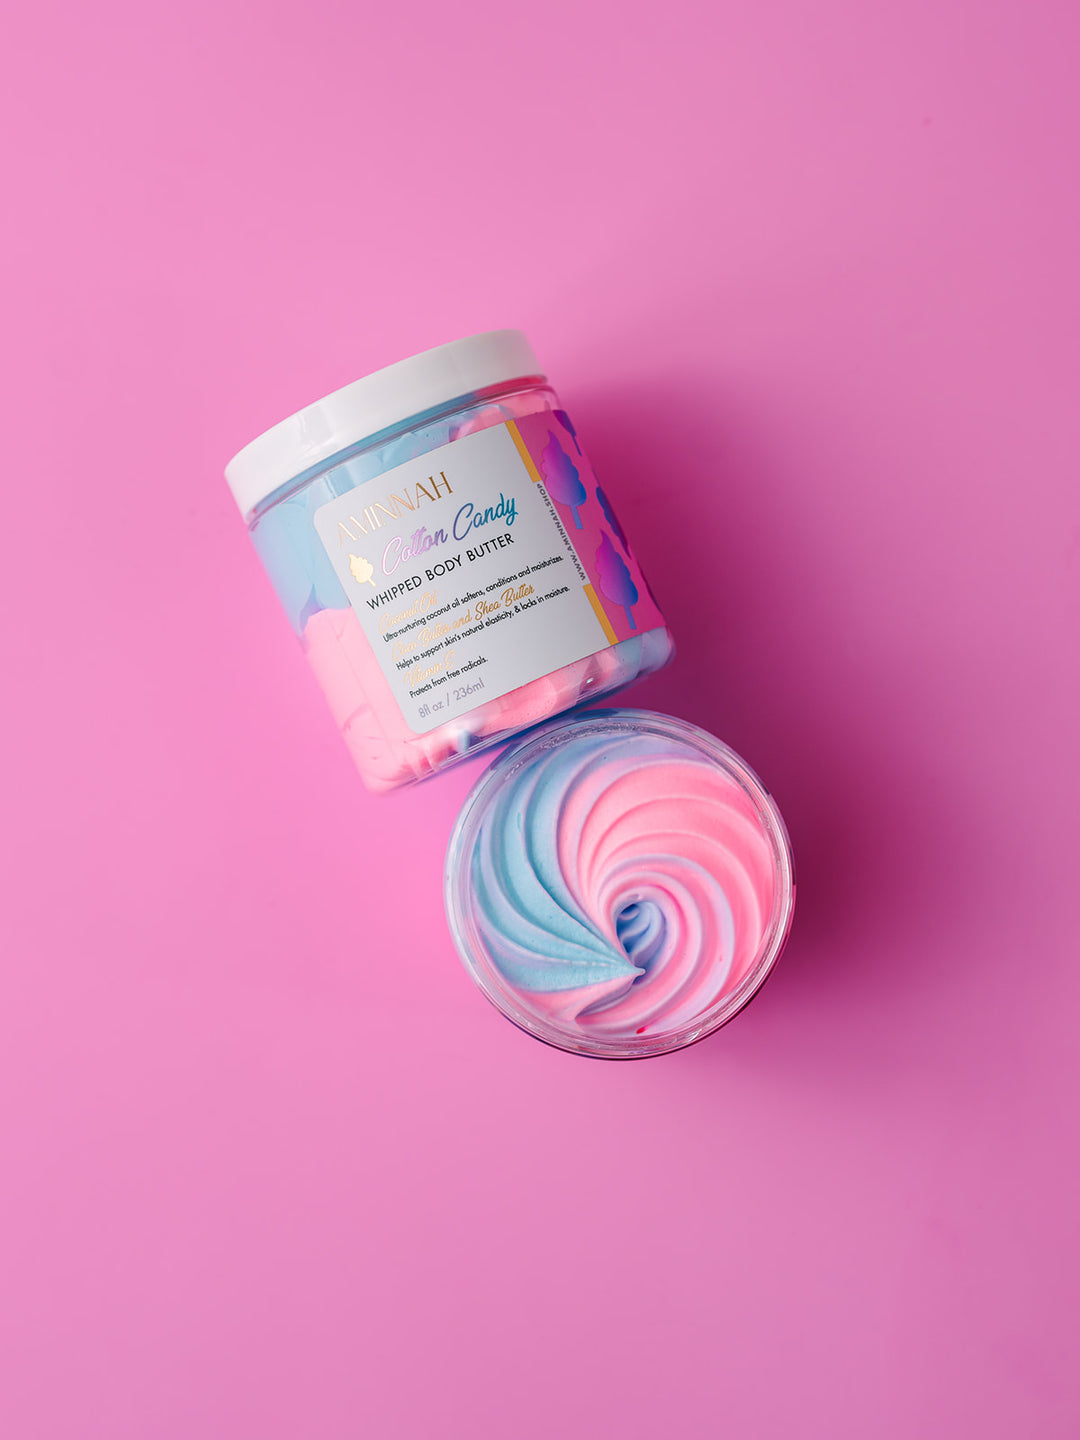 “Cotton Candy” Whipped Body Butter